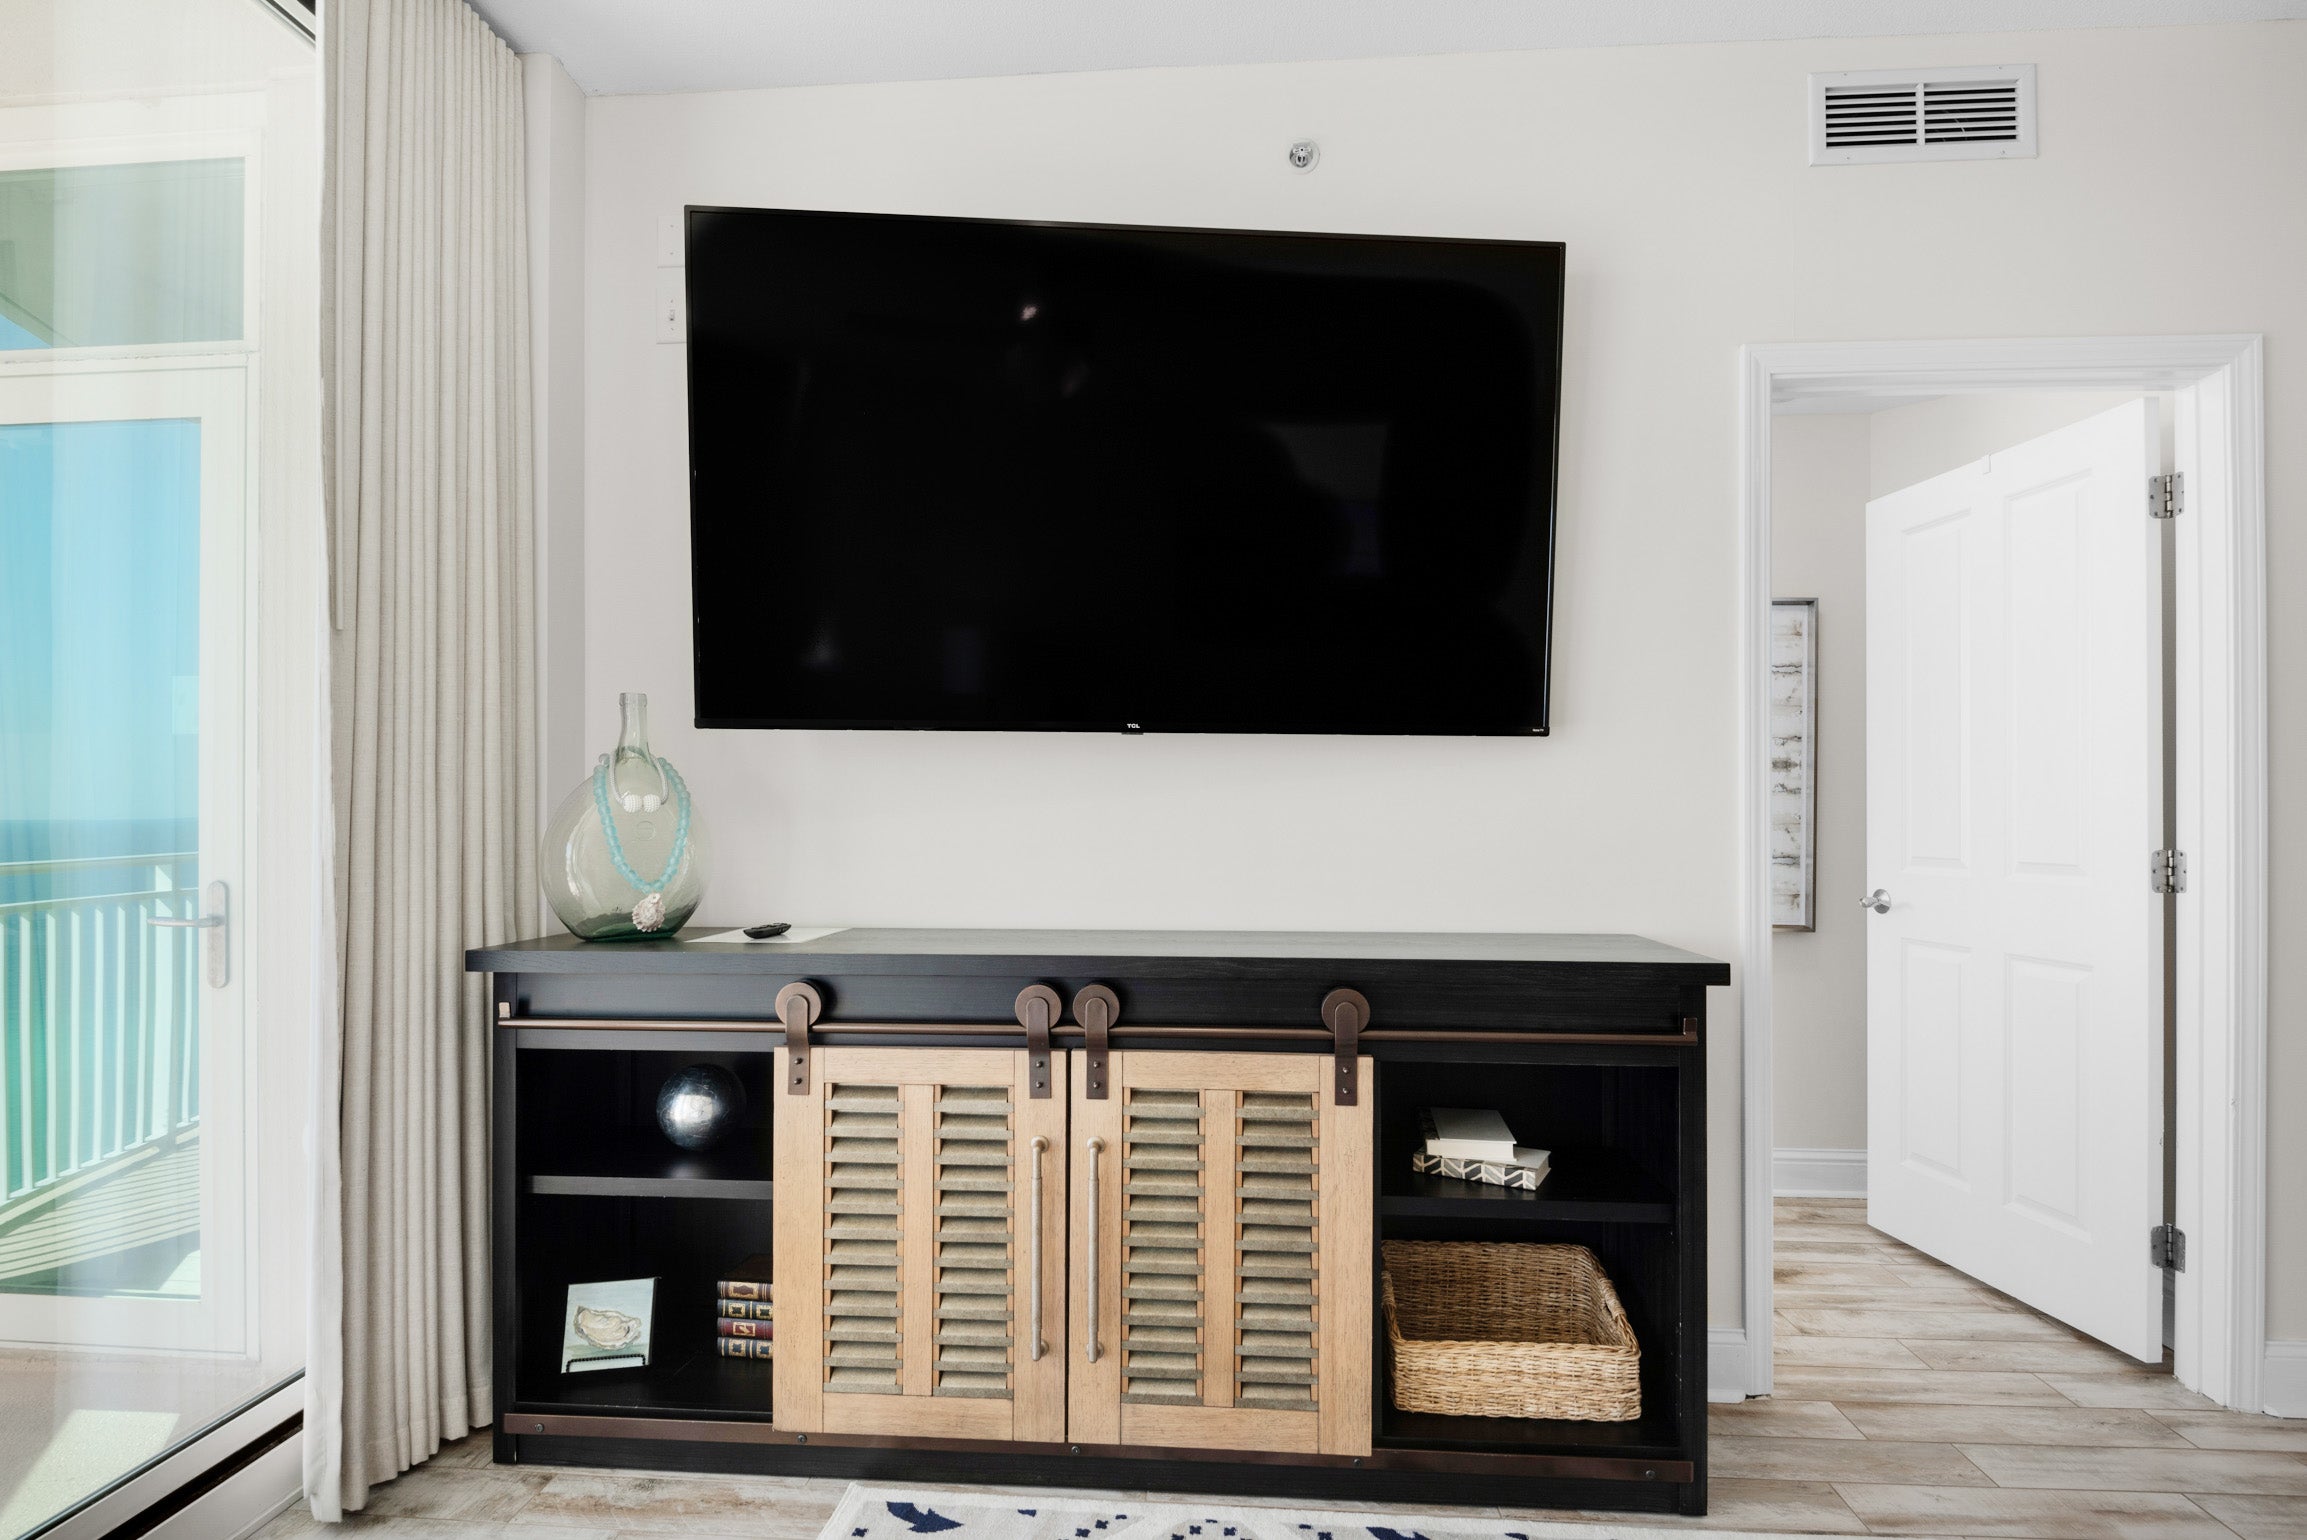 Relax and watch a movie on the flatscreen TV